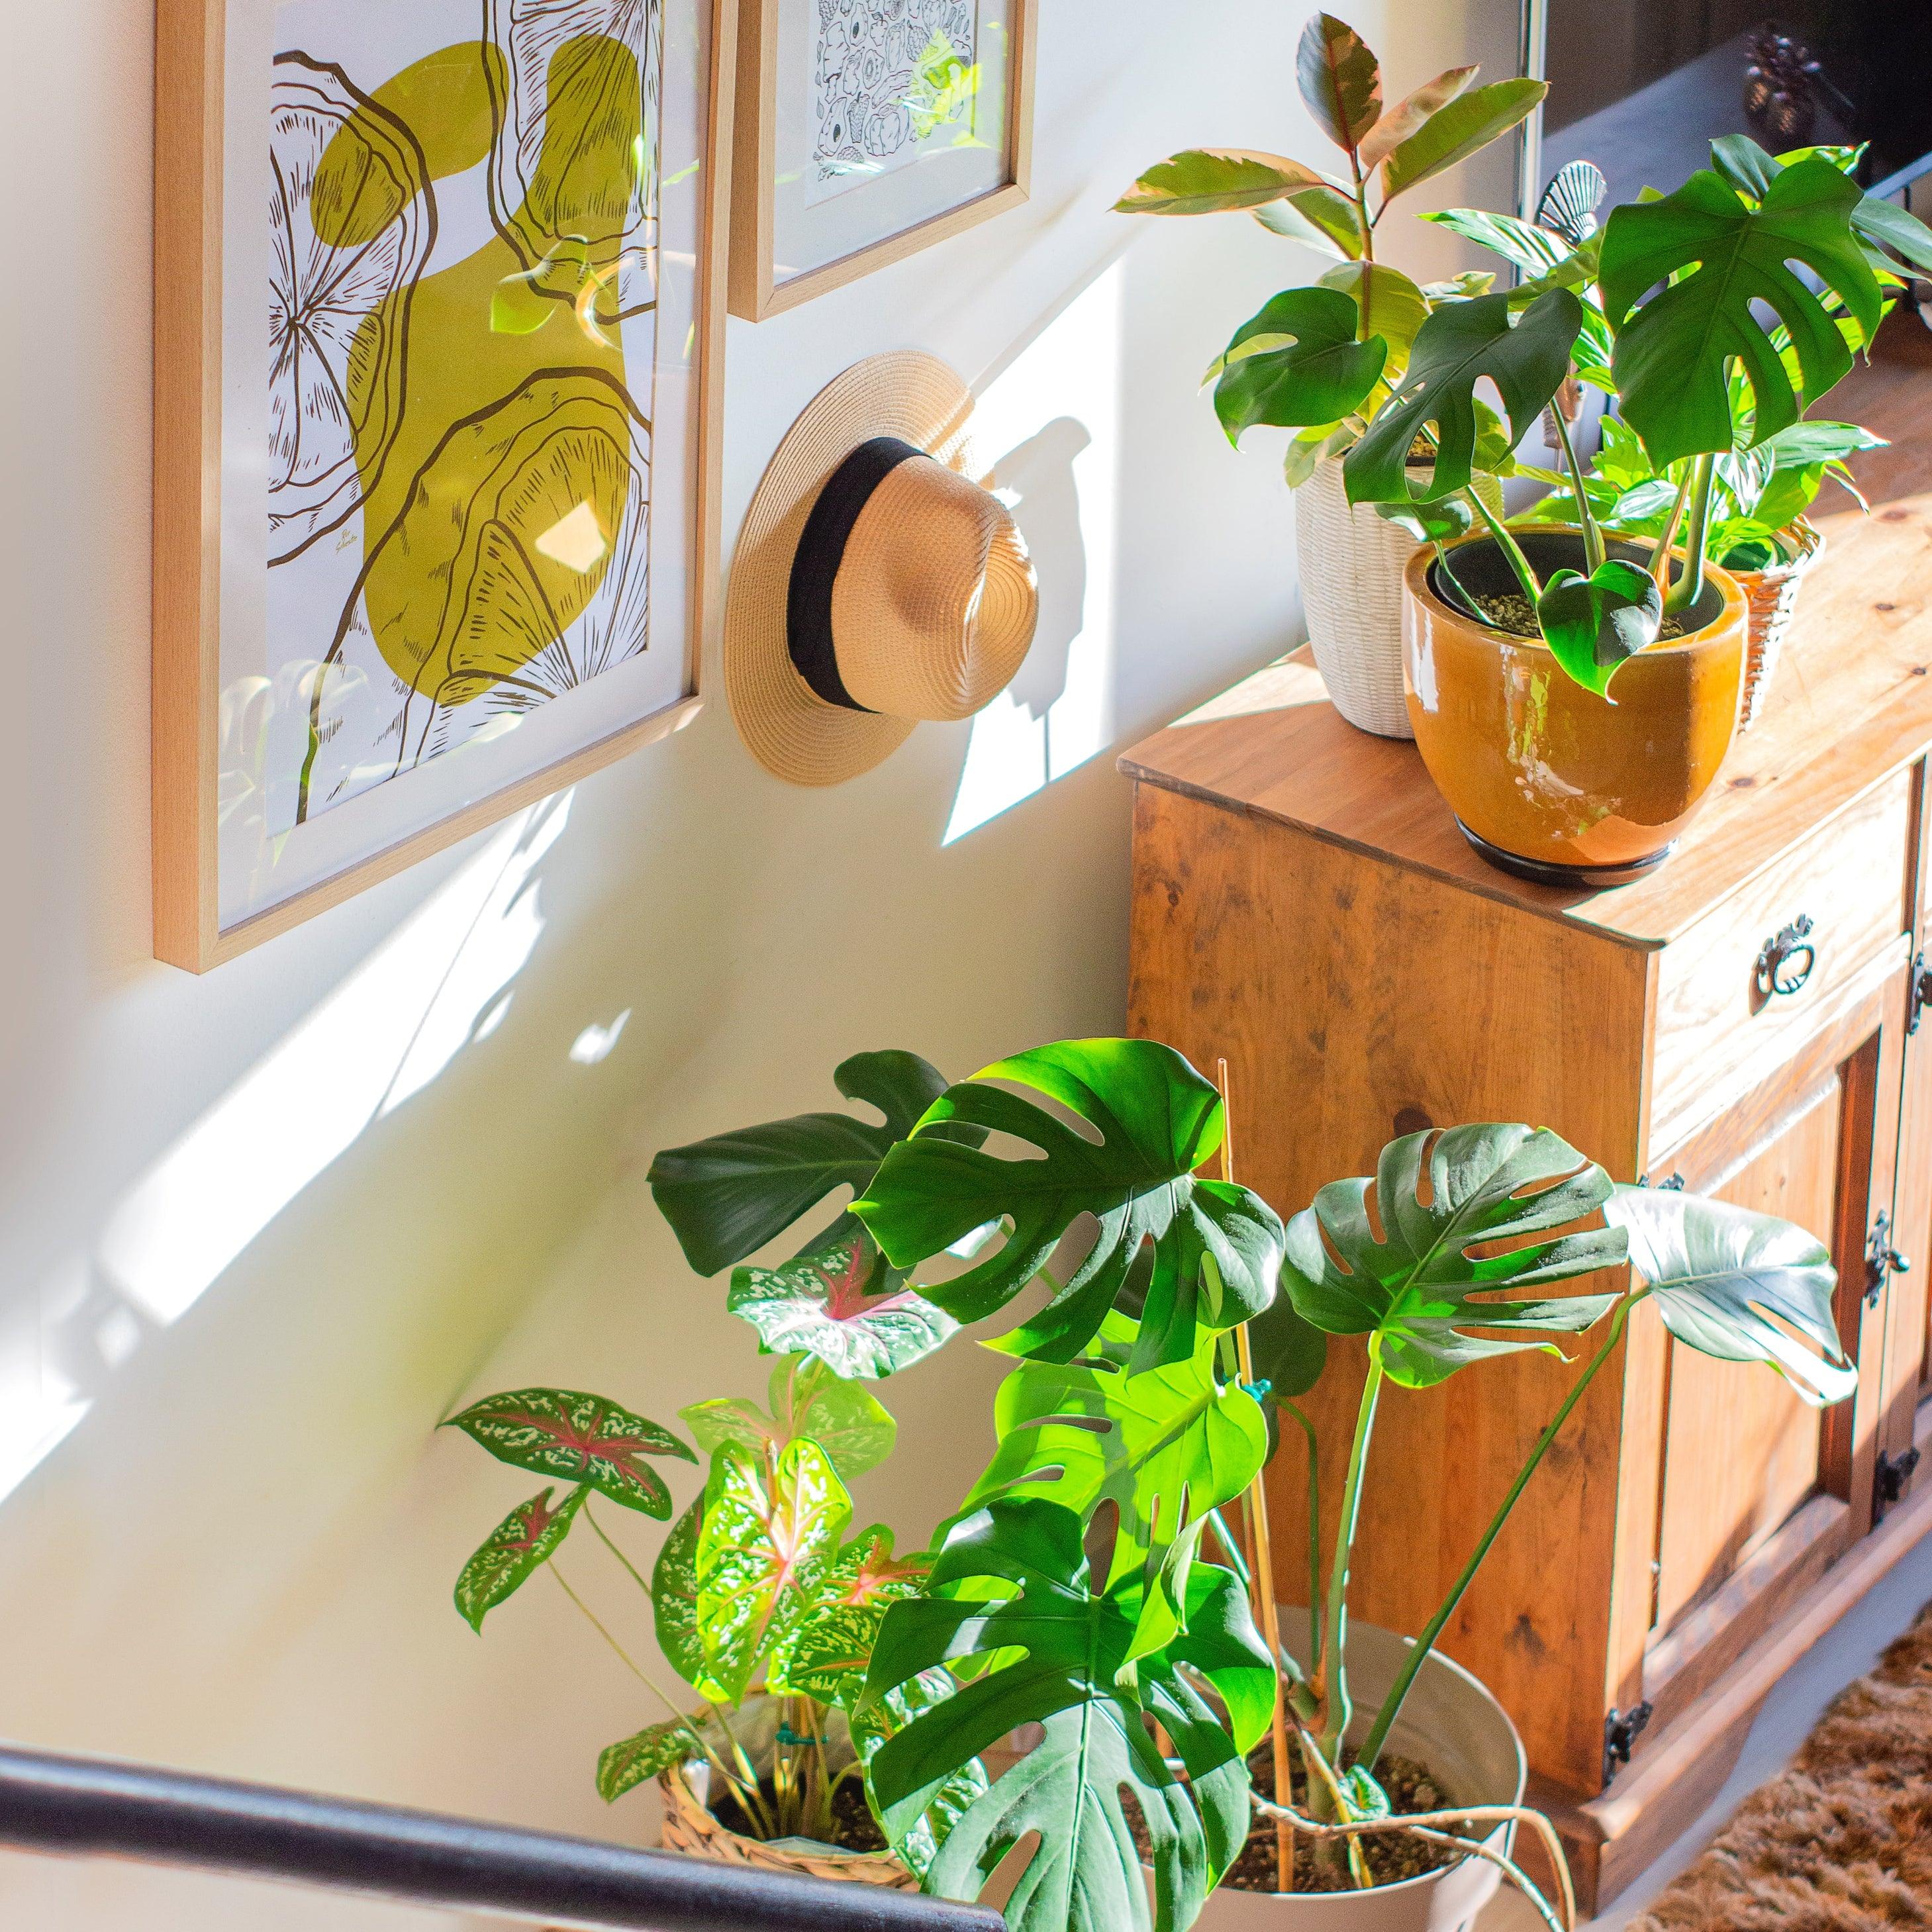 The benefits of houseplants - for peat's sake